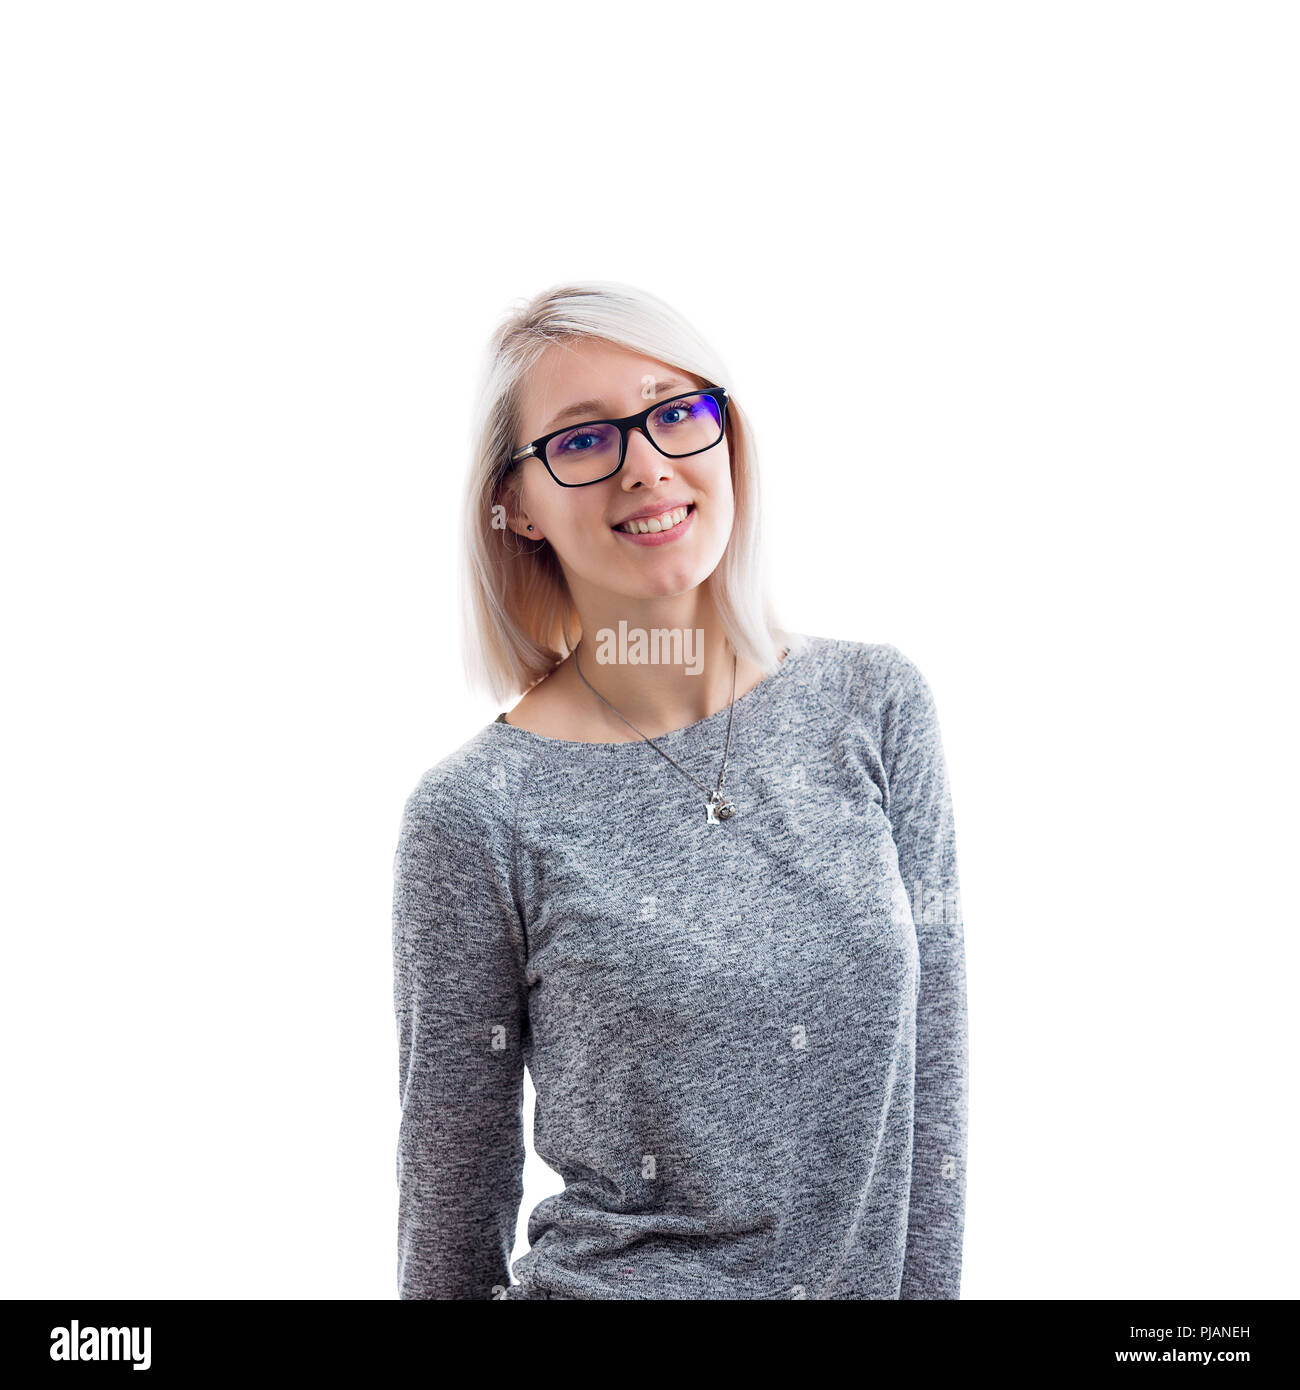 Beautiful cheerful young girl posing, wearing glasses isolated on white background. Stock Photo